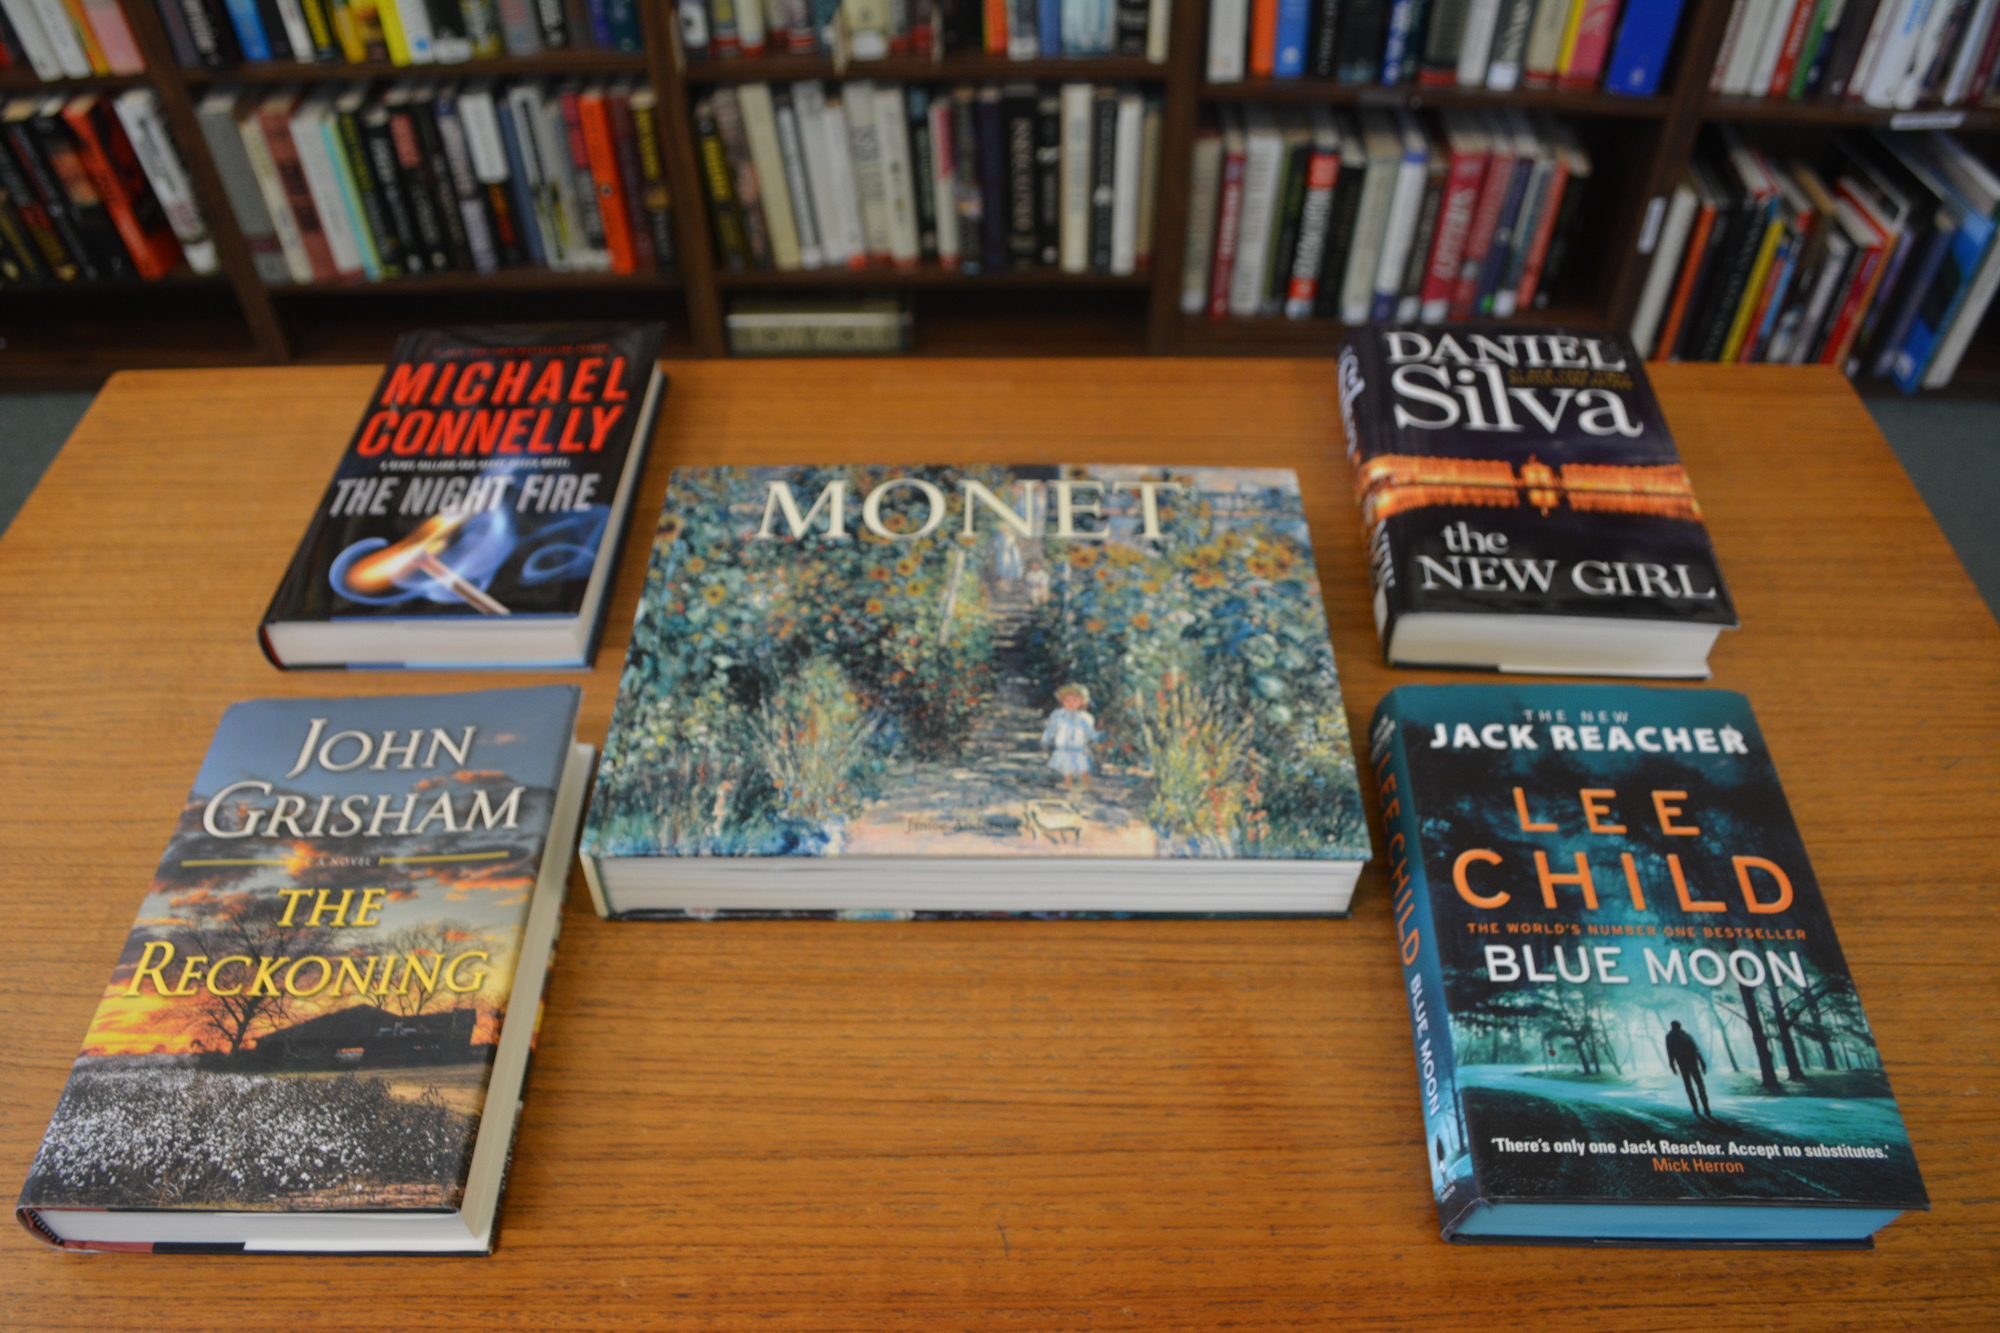 A Monet art book and novels written by John Grisham, Daniel Silva, Michael Connelly and Lee Child are among  the books the library is advertising as 